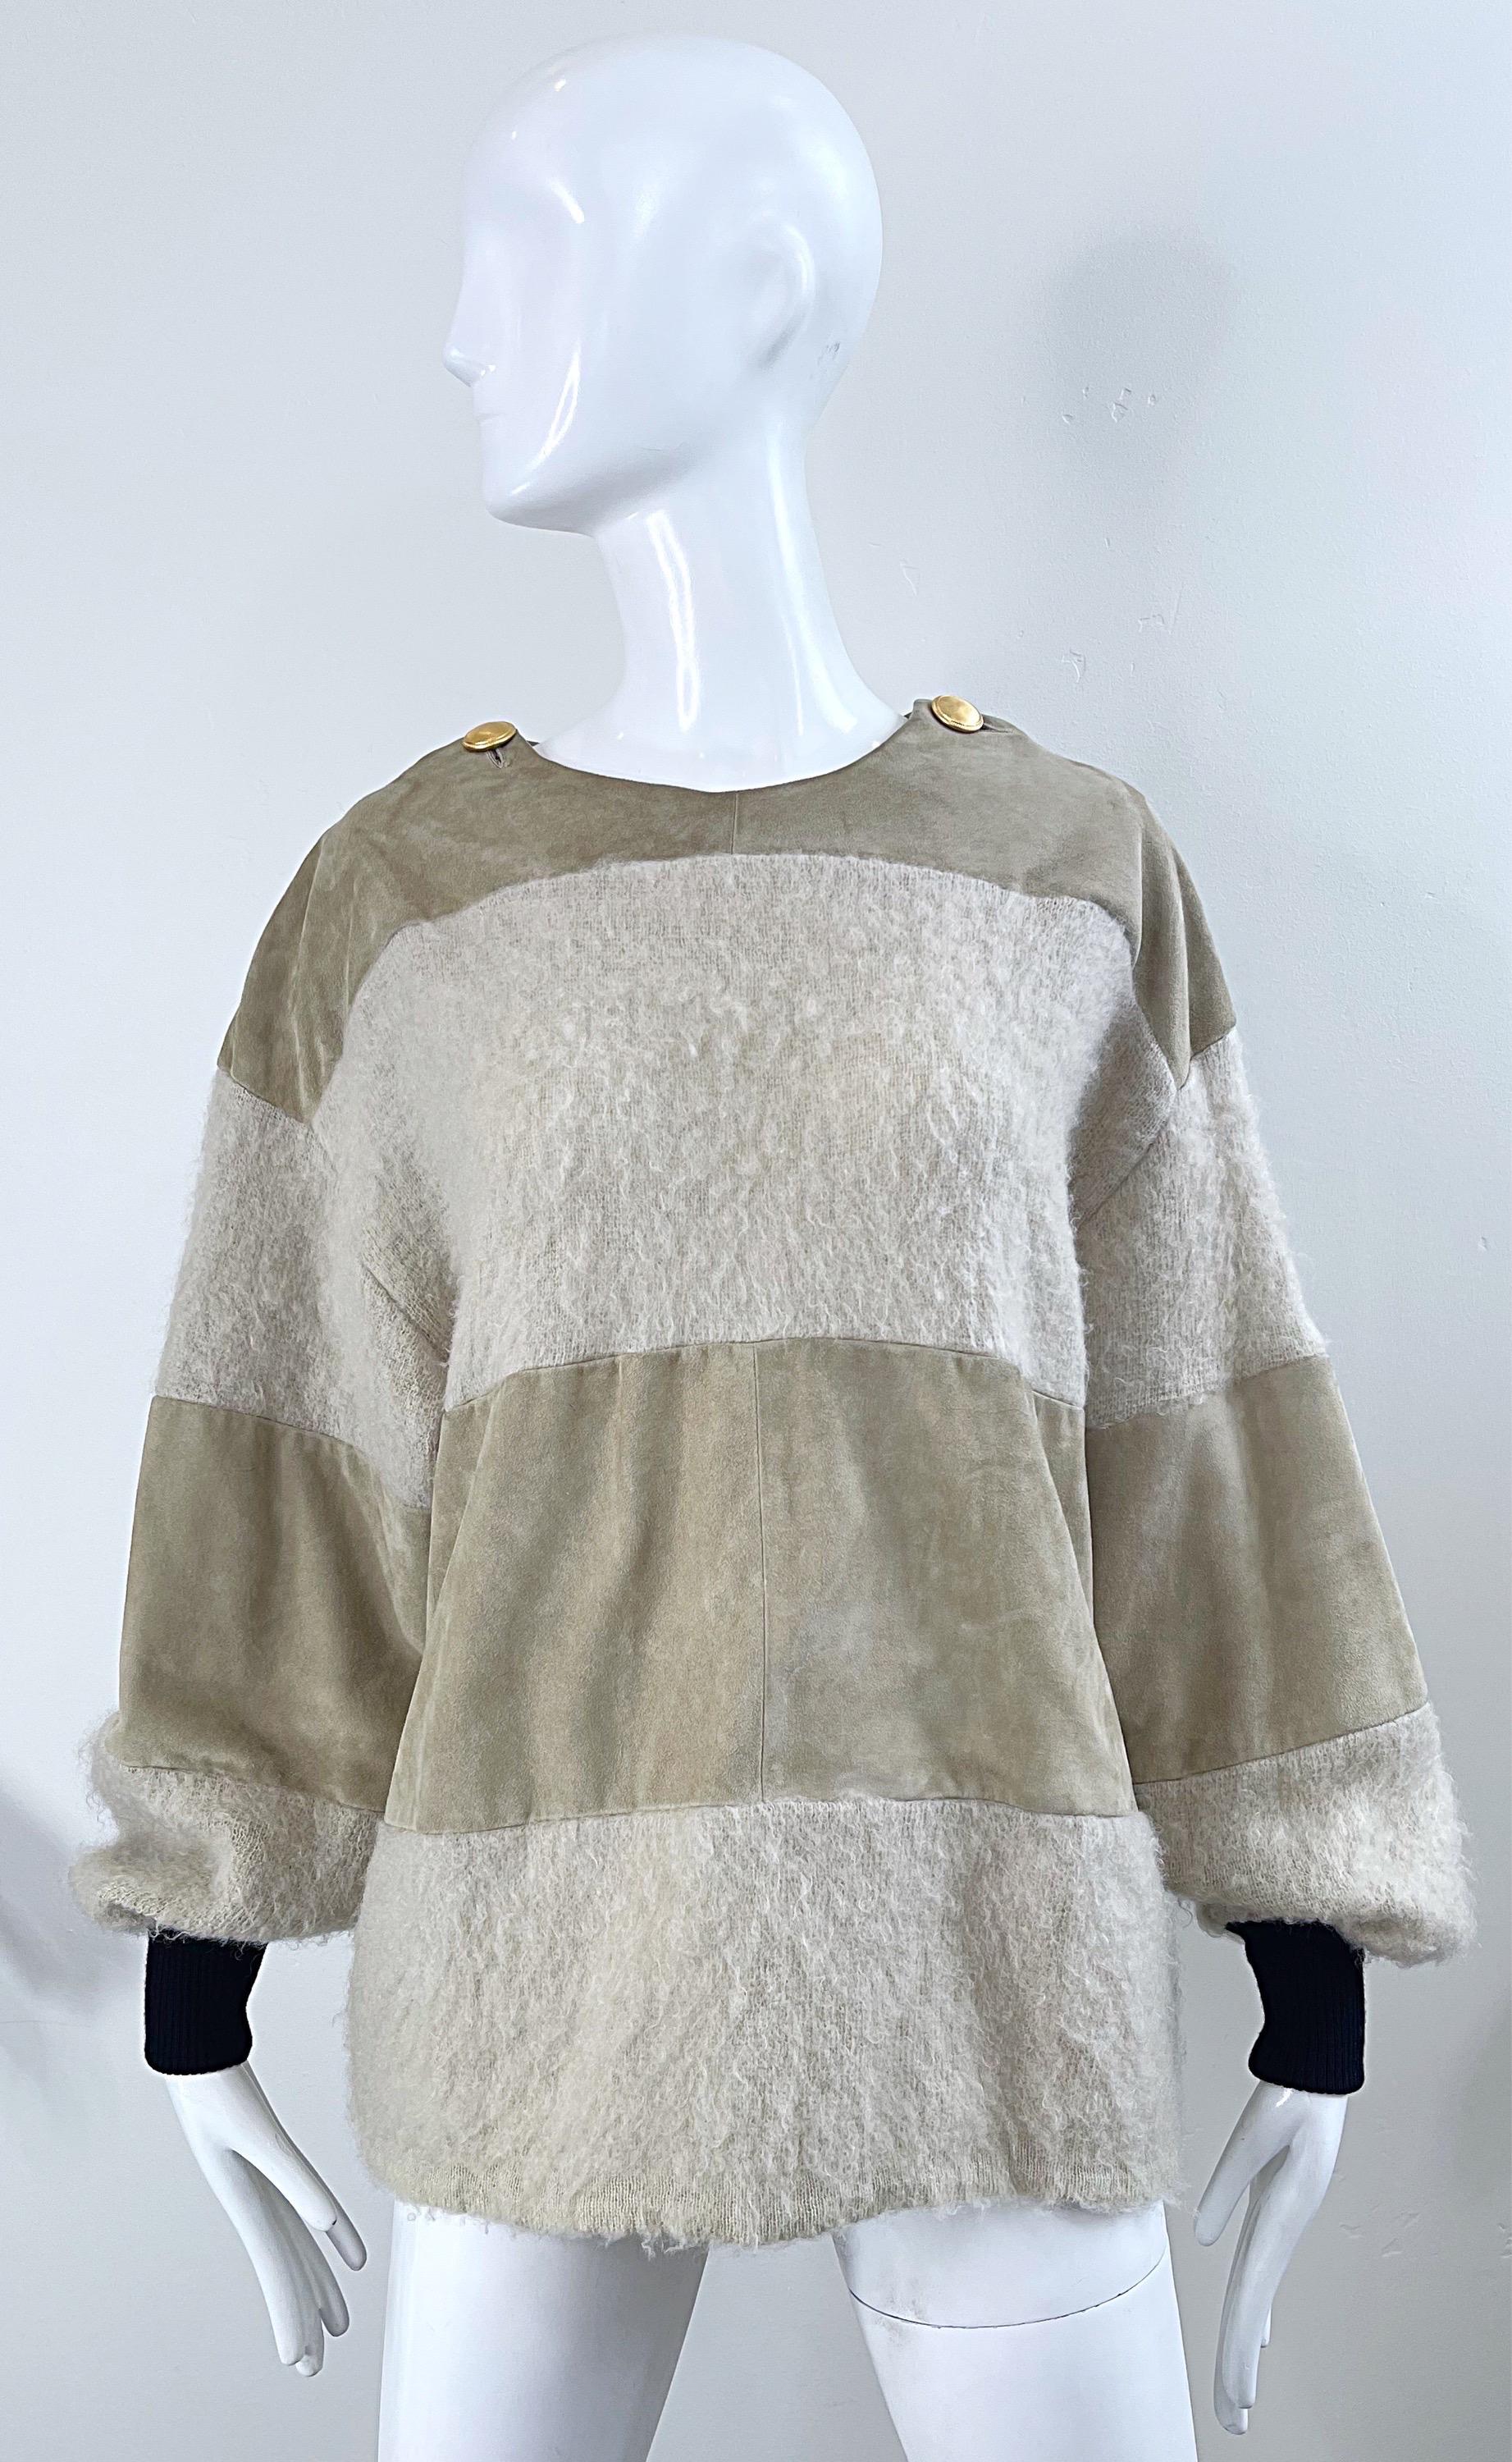 Gianfranco Ferre 1990s Leather Suede + Mohair Tan Nude Vintage 90s Sweater Top In Excellent Condition For Sale In San Diego, CA